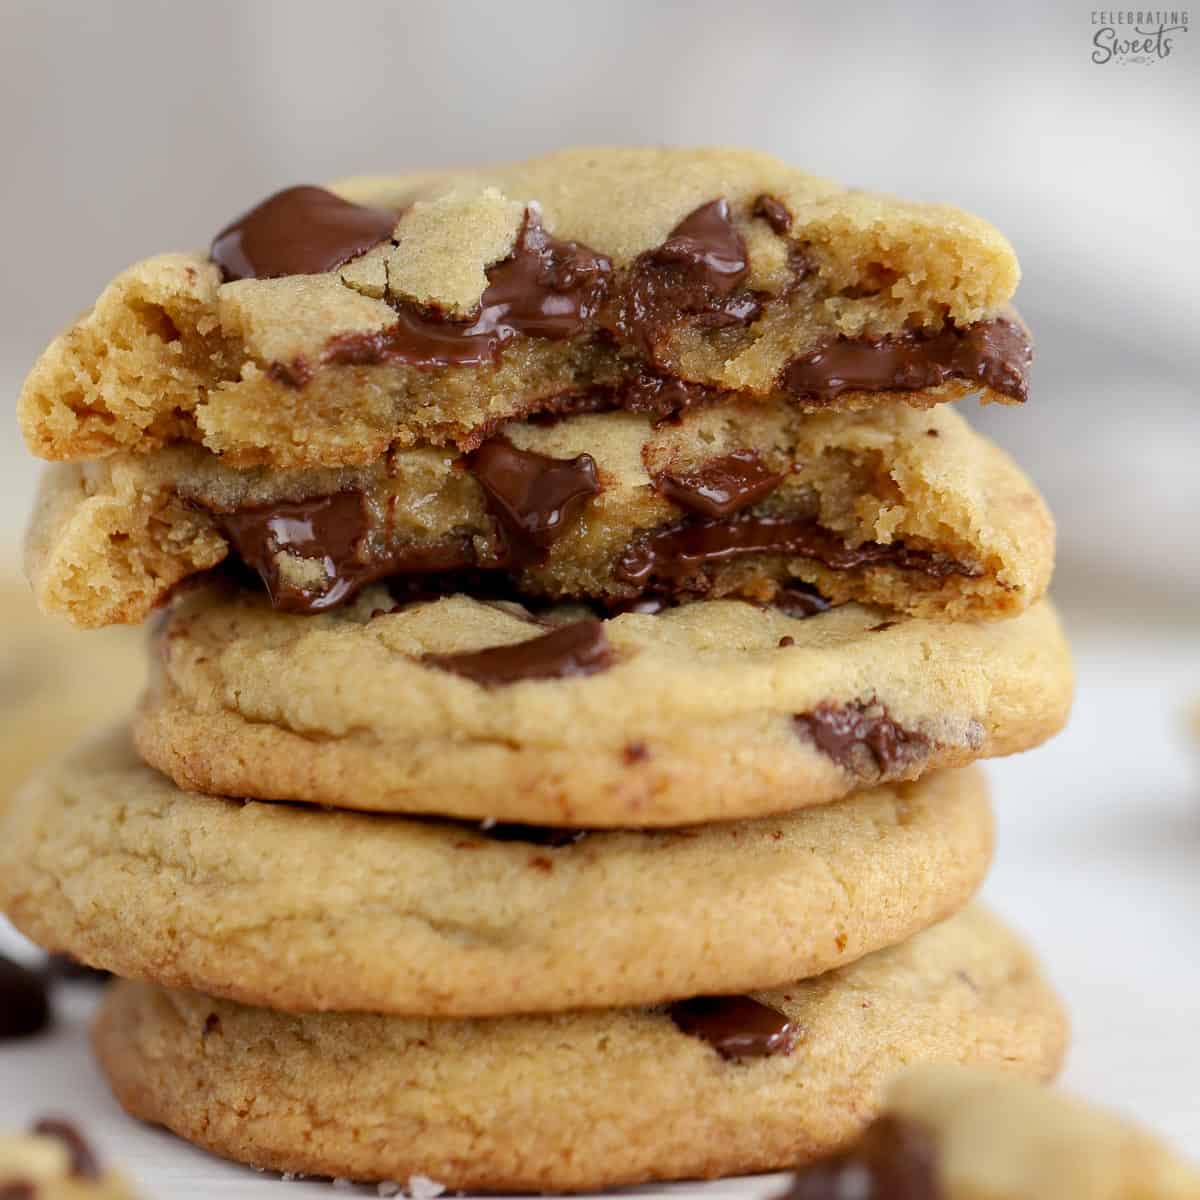 https://celebratingsweets.com/wp-content/uploads/2022/02/Small-Batch-Chocolate-Chip-Cookies-10.jpg